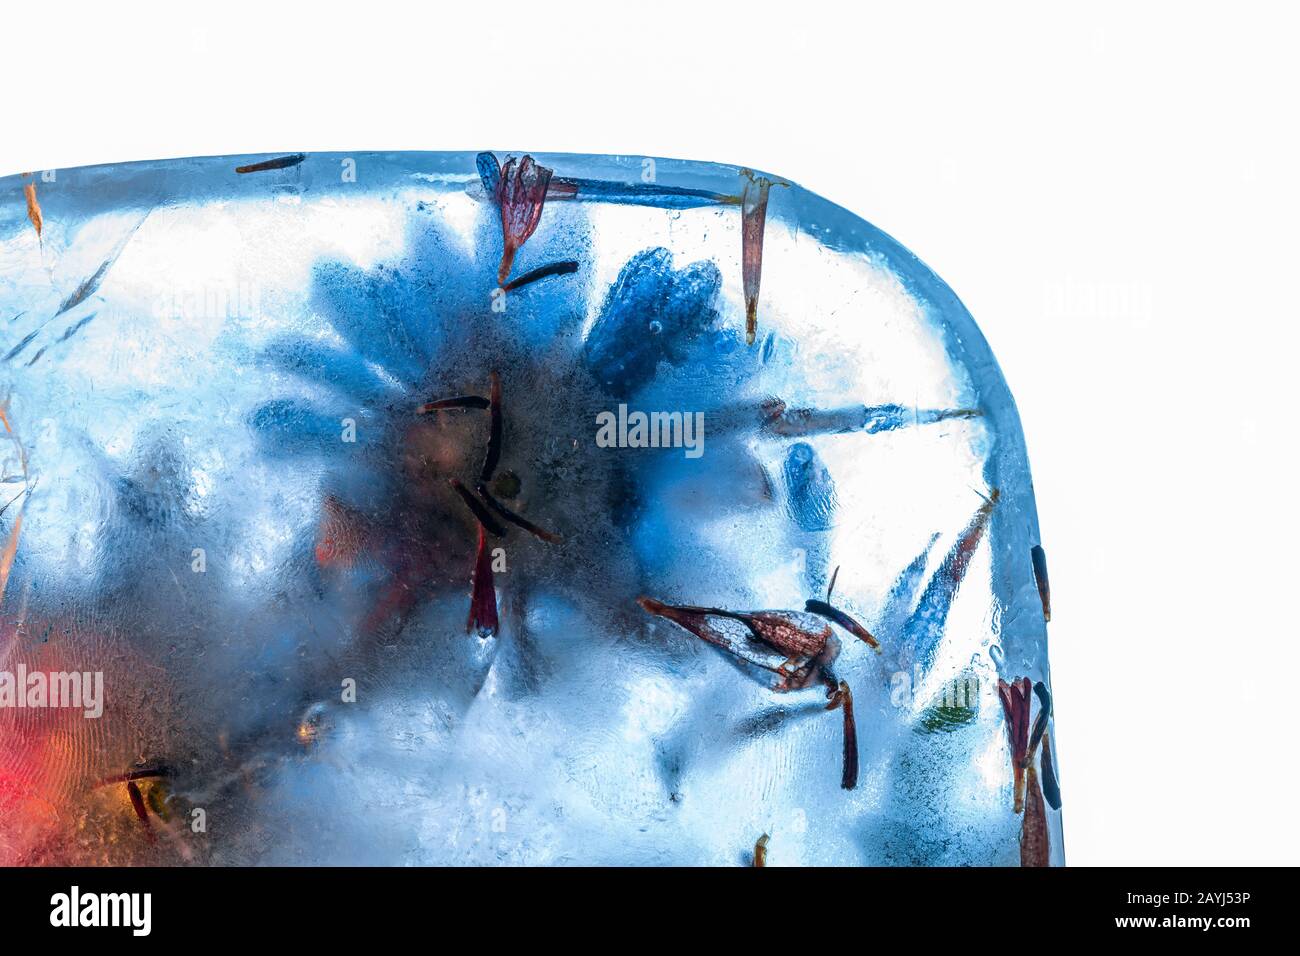 Frozen flowers in thick blue ice block with cracked surface on white background Stock Photo